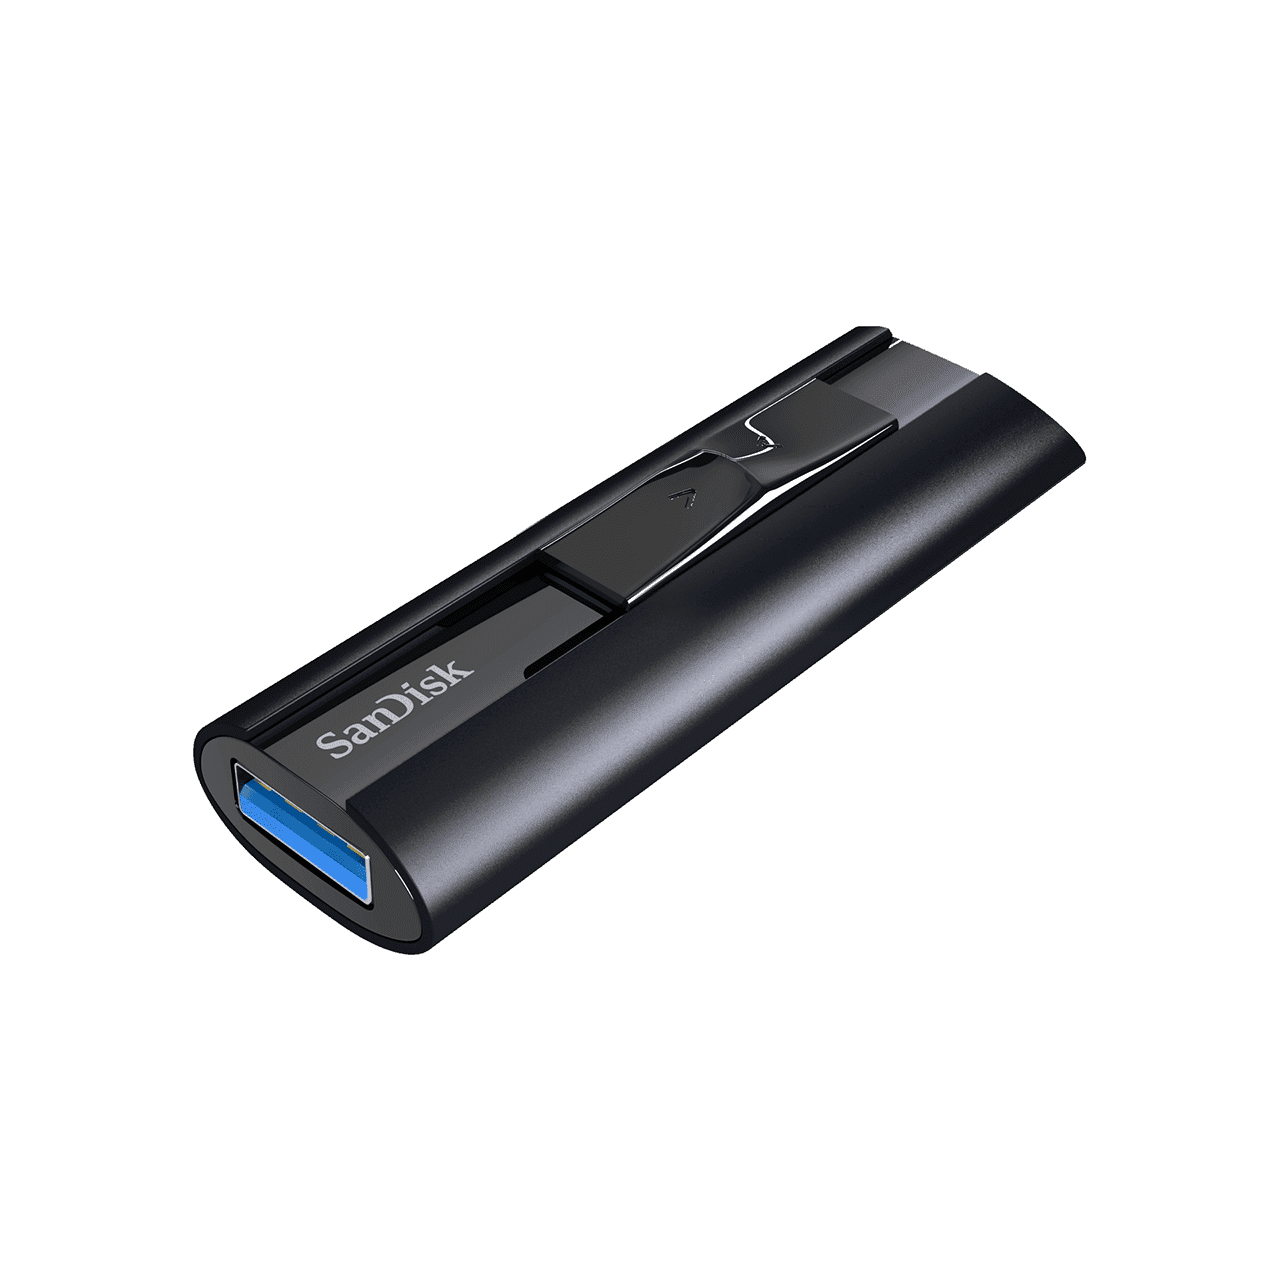 128GB EXTREME PRO USB3.1 SOLID STATE